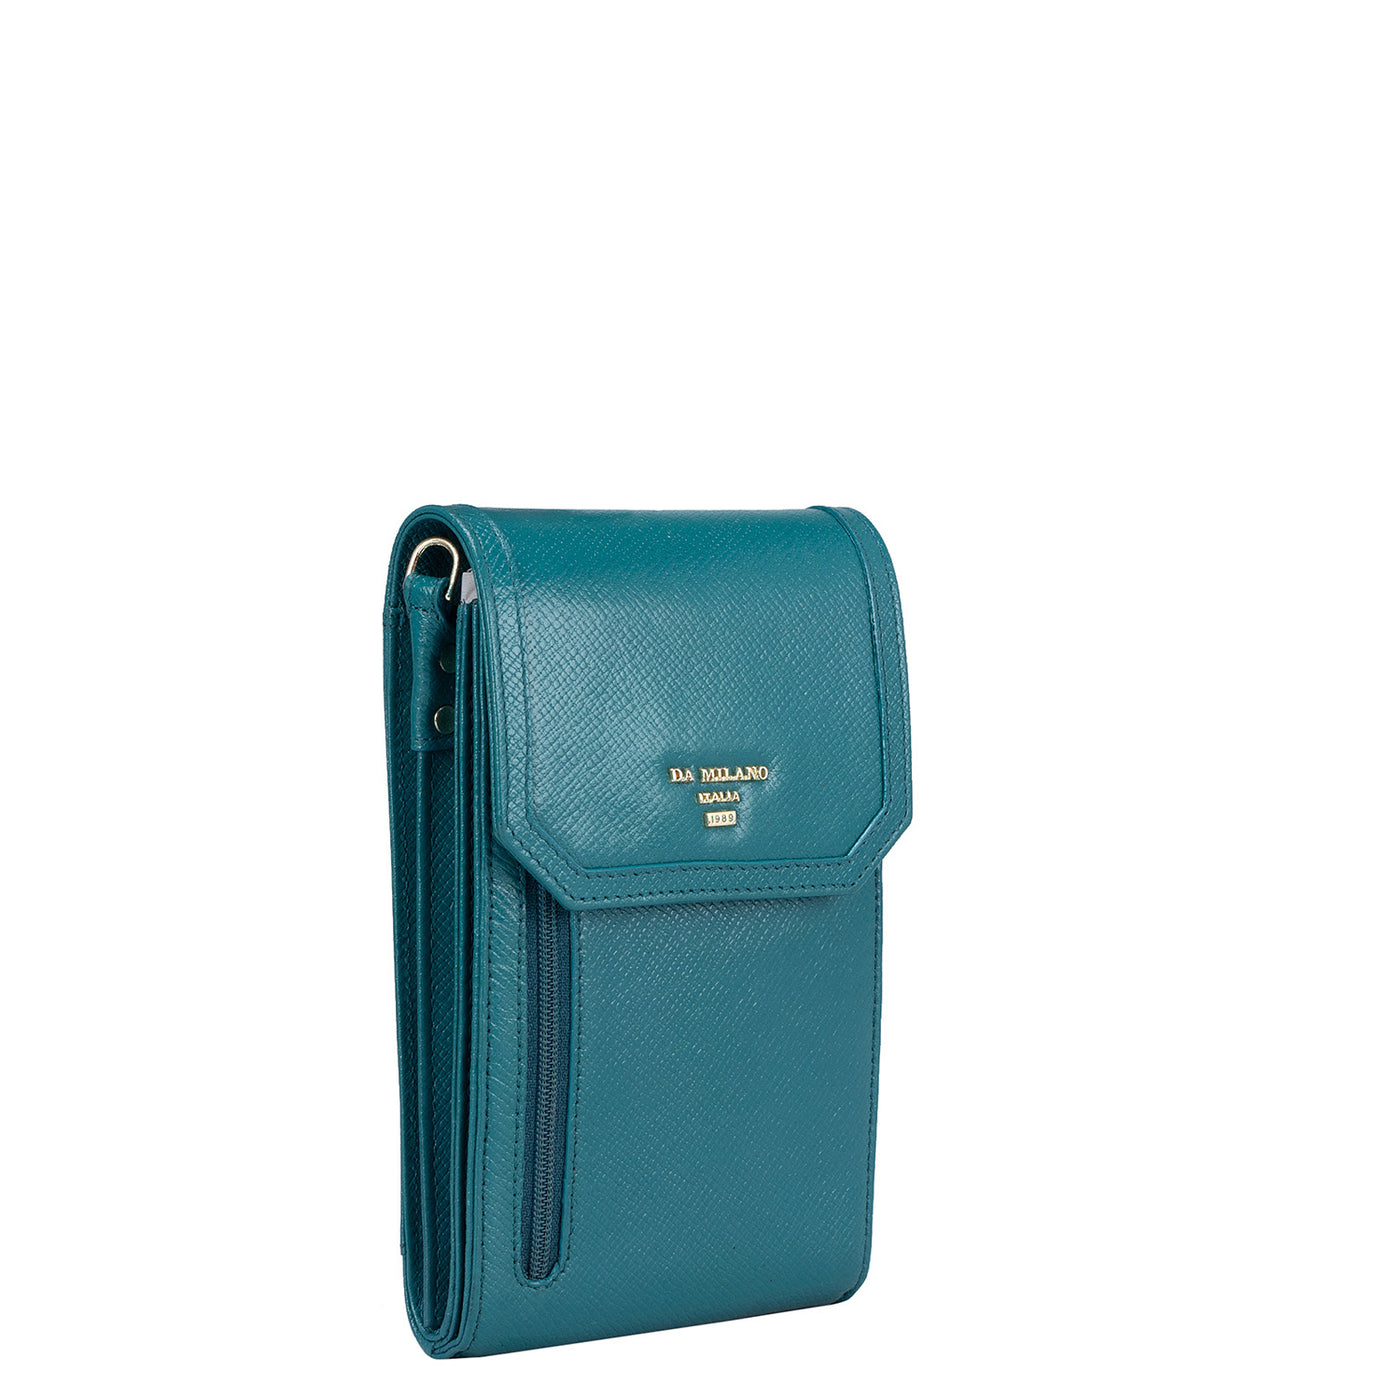 Franzy Leather Cross Body - Teal